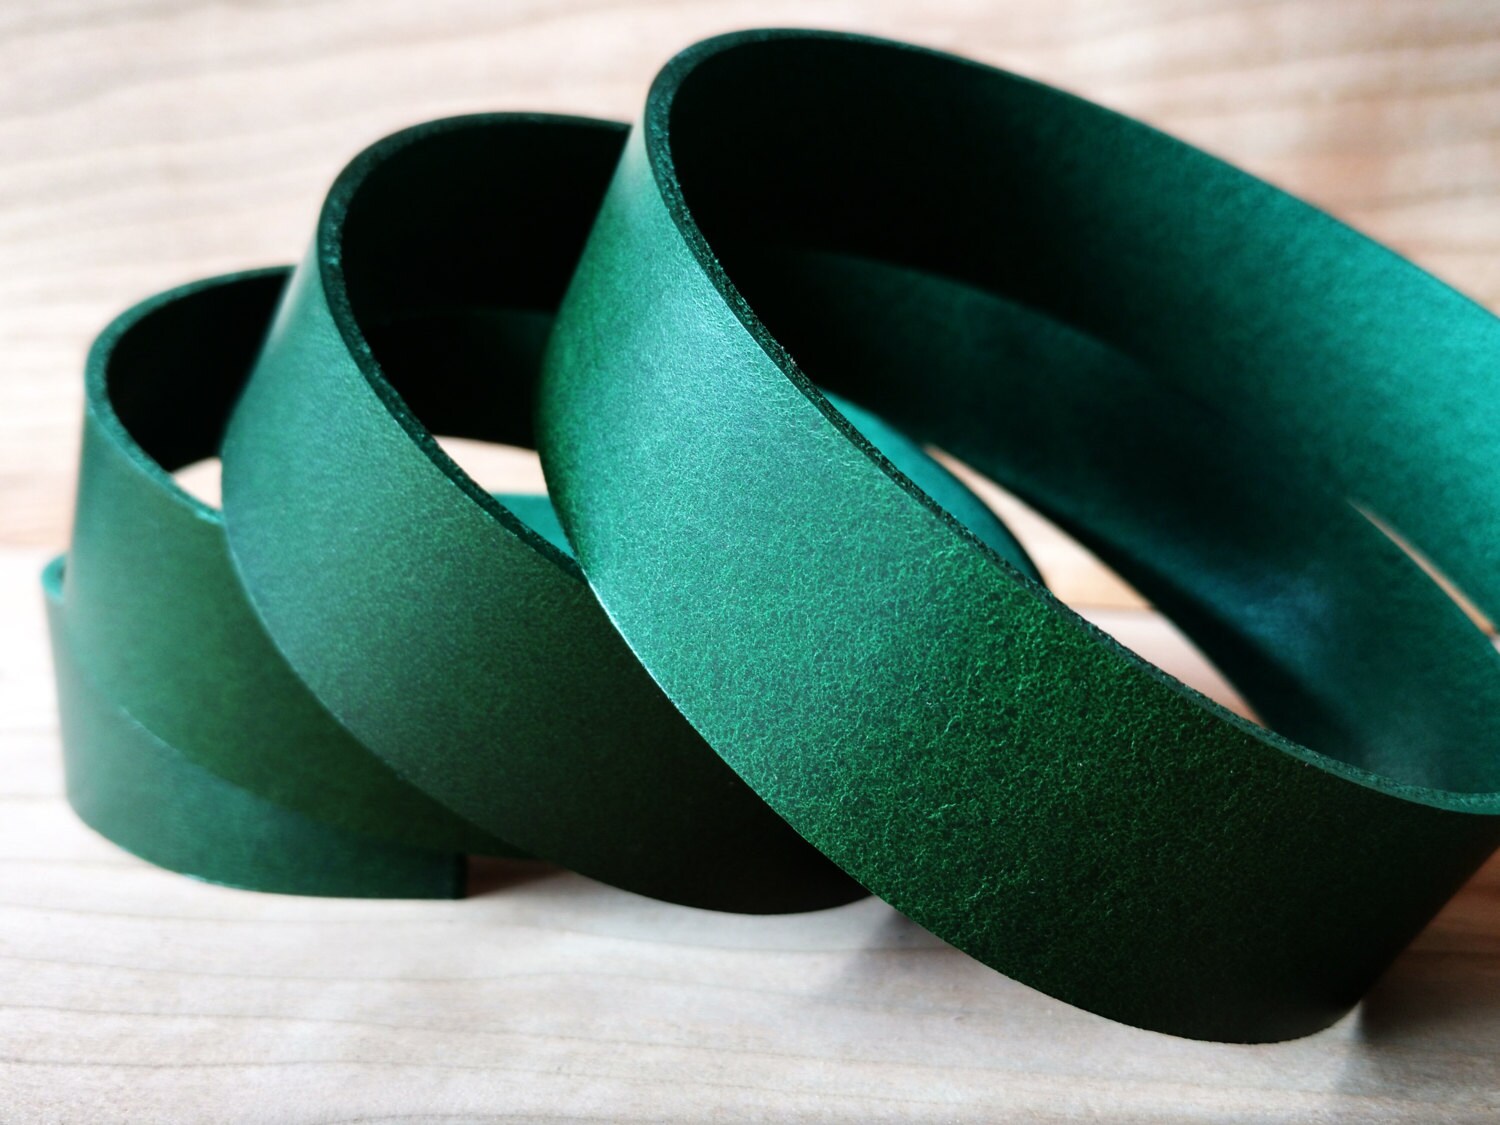 46" GREEN VEGETABLE TANNED LEATHER STRAP 1.8/2mm TUSCANY LEATHER VARIOUS WIDTHS 